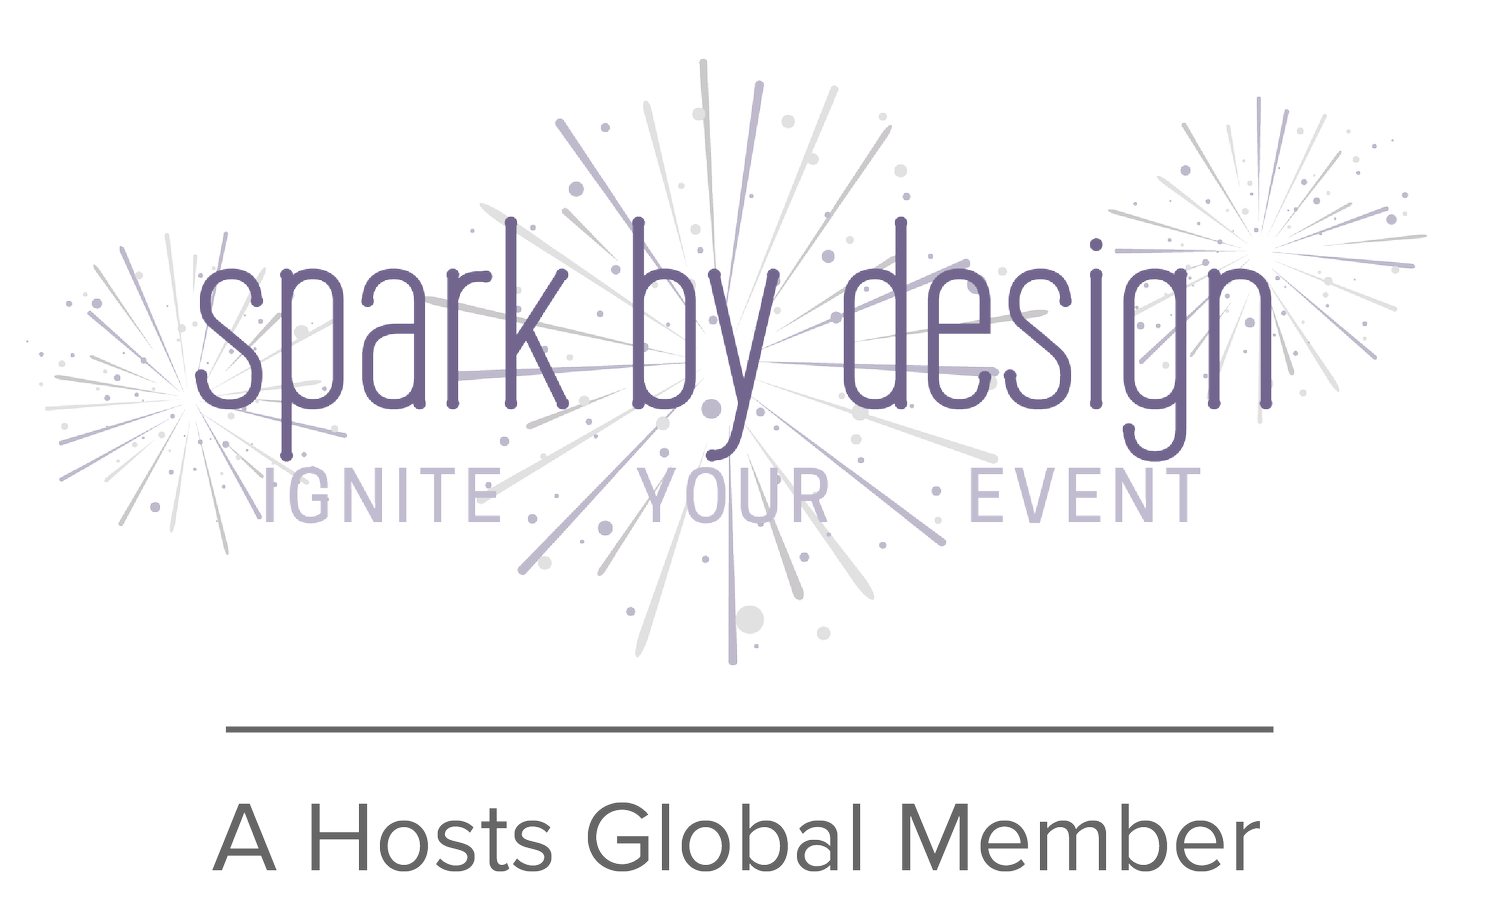 Spark By Design Event Planner and Design Corporate Weddings Party Charlotte NC Call: 704-525-9233 / ignite@sparkbydesign